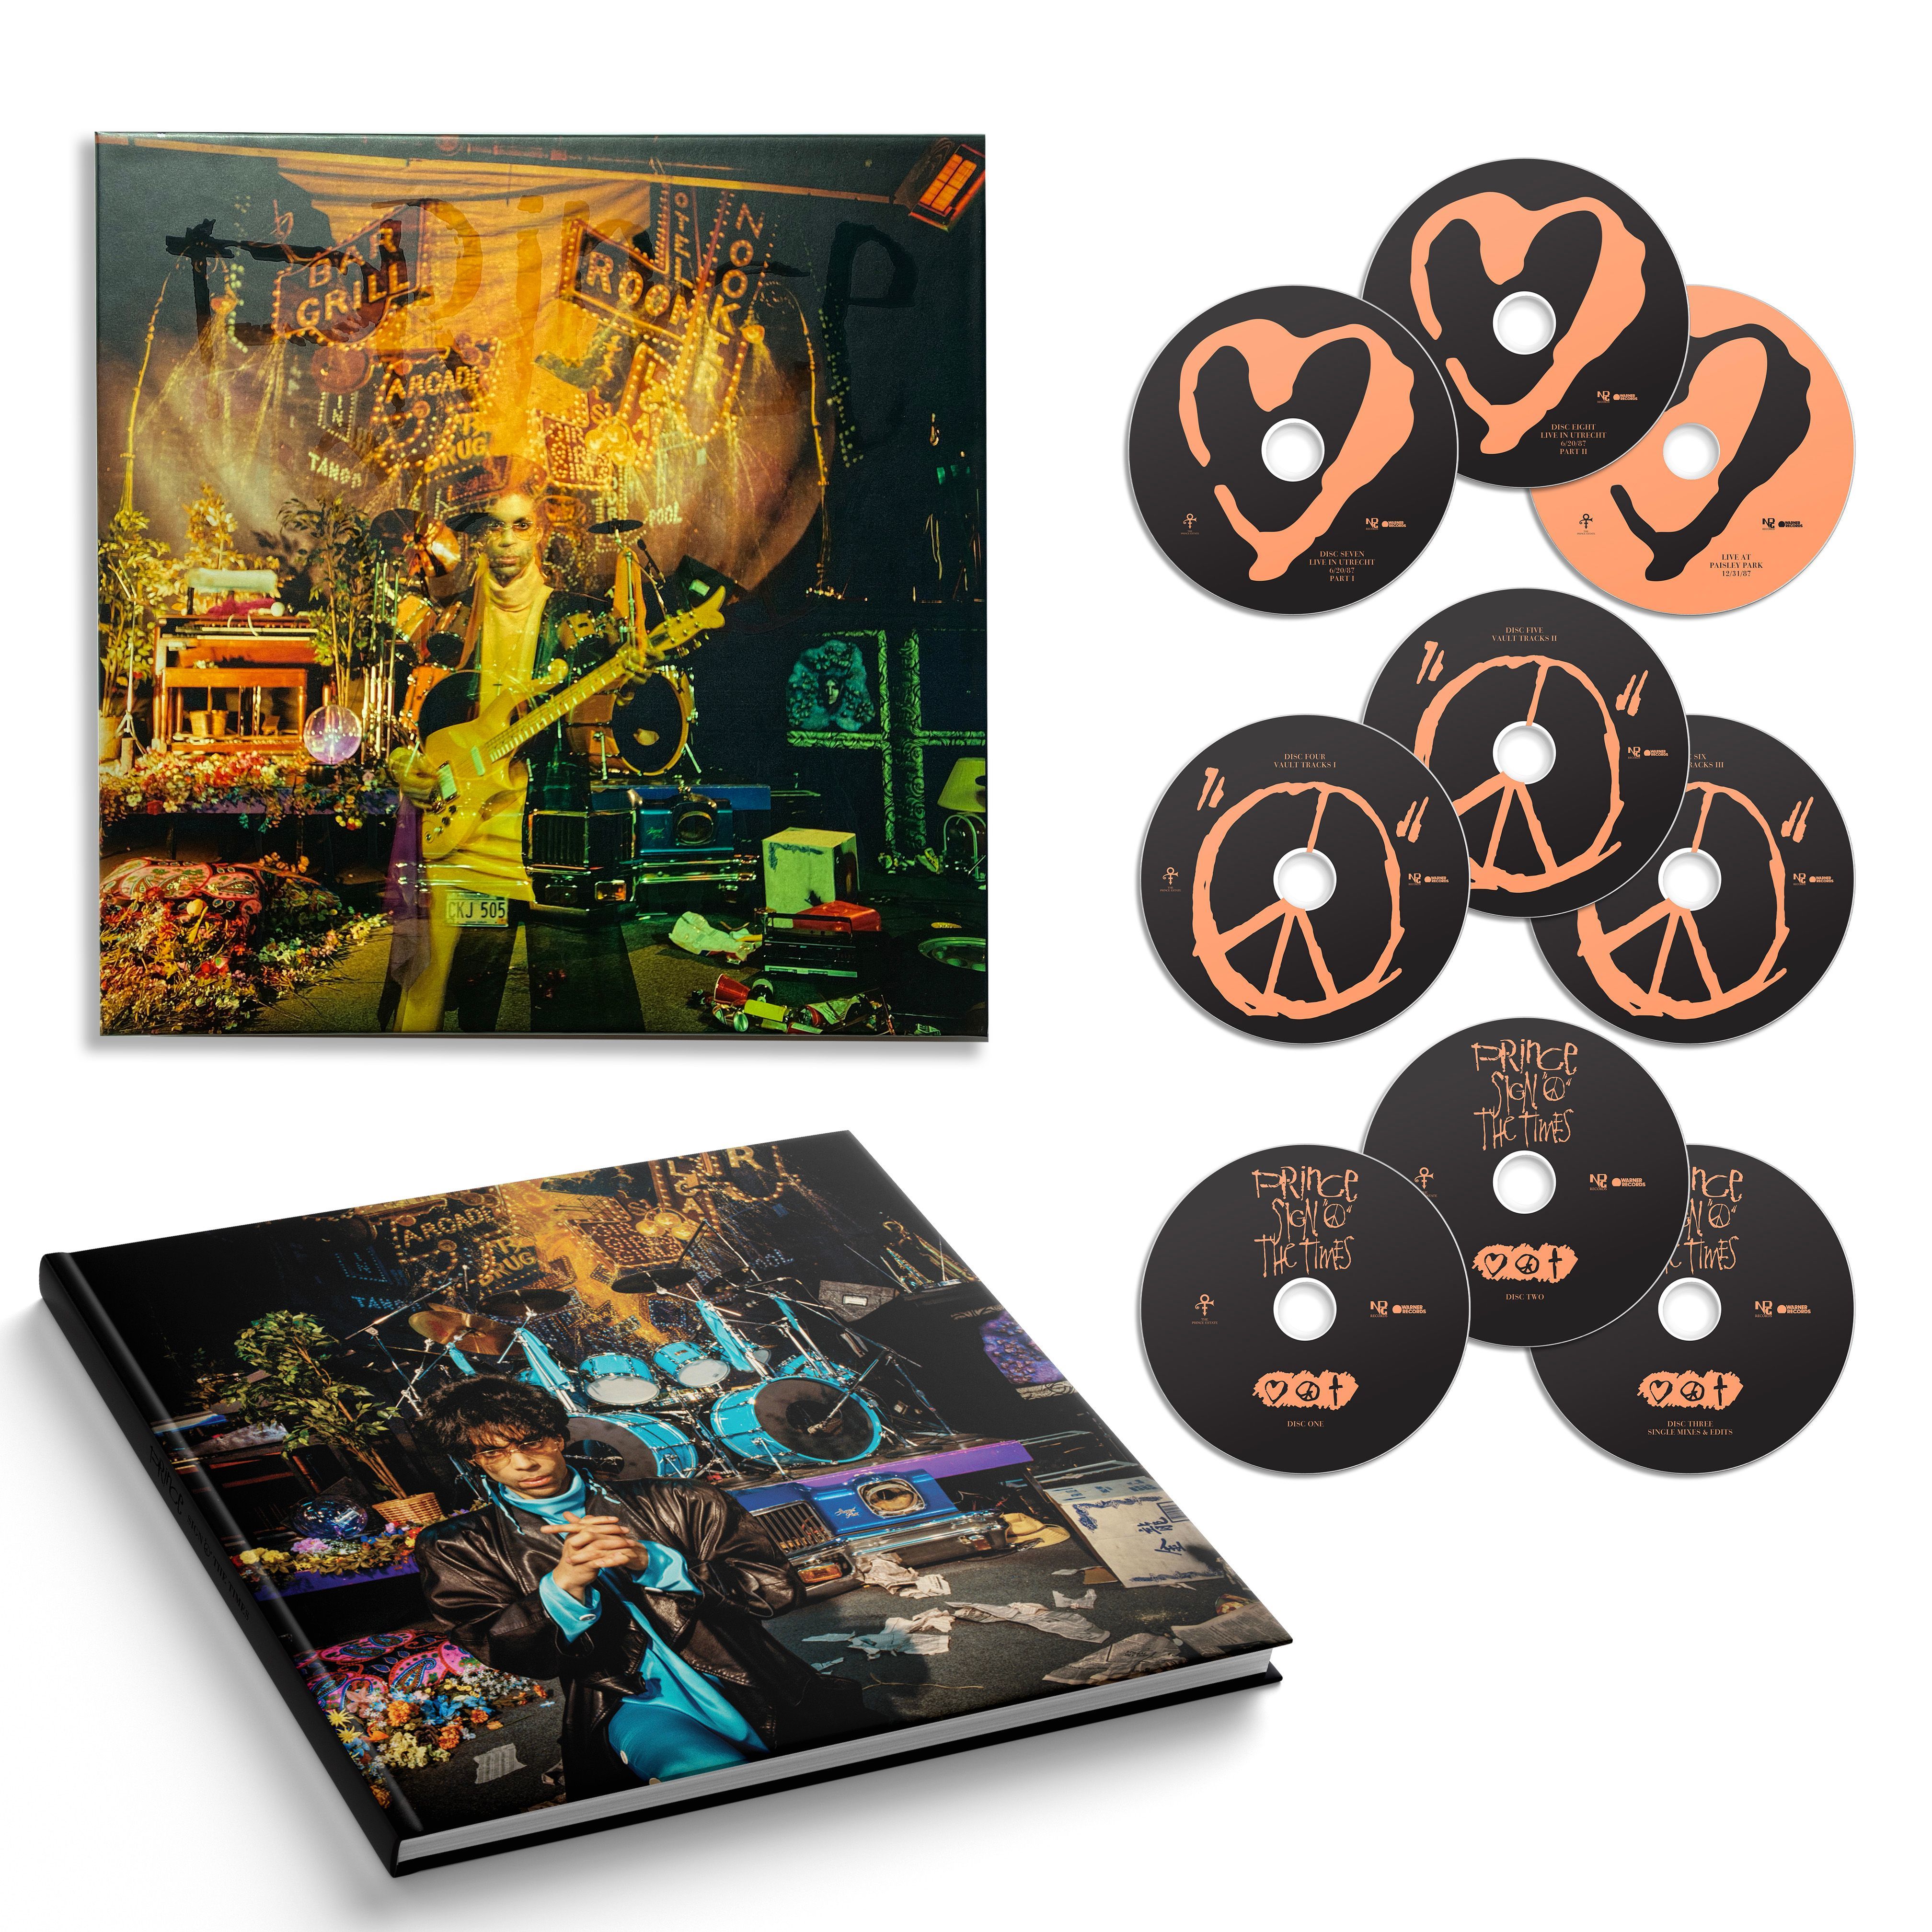 Prince - Sign O’ The Times: Super Deluxe 8CD + DVD Box Set